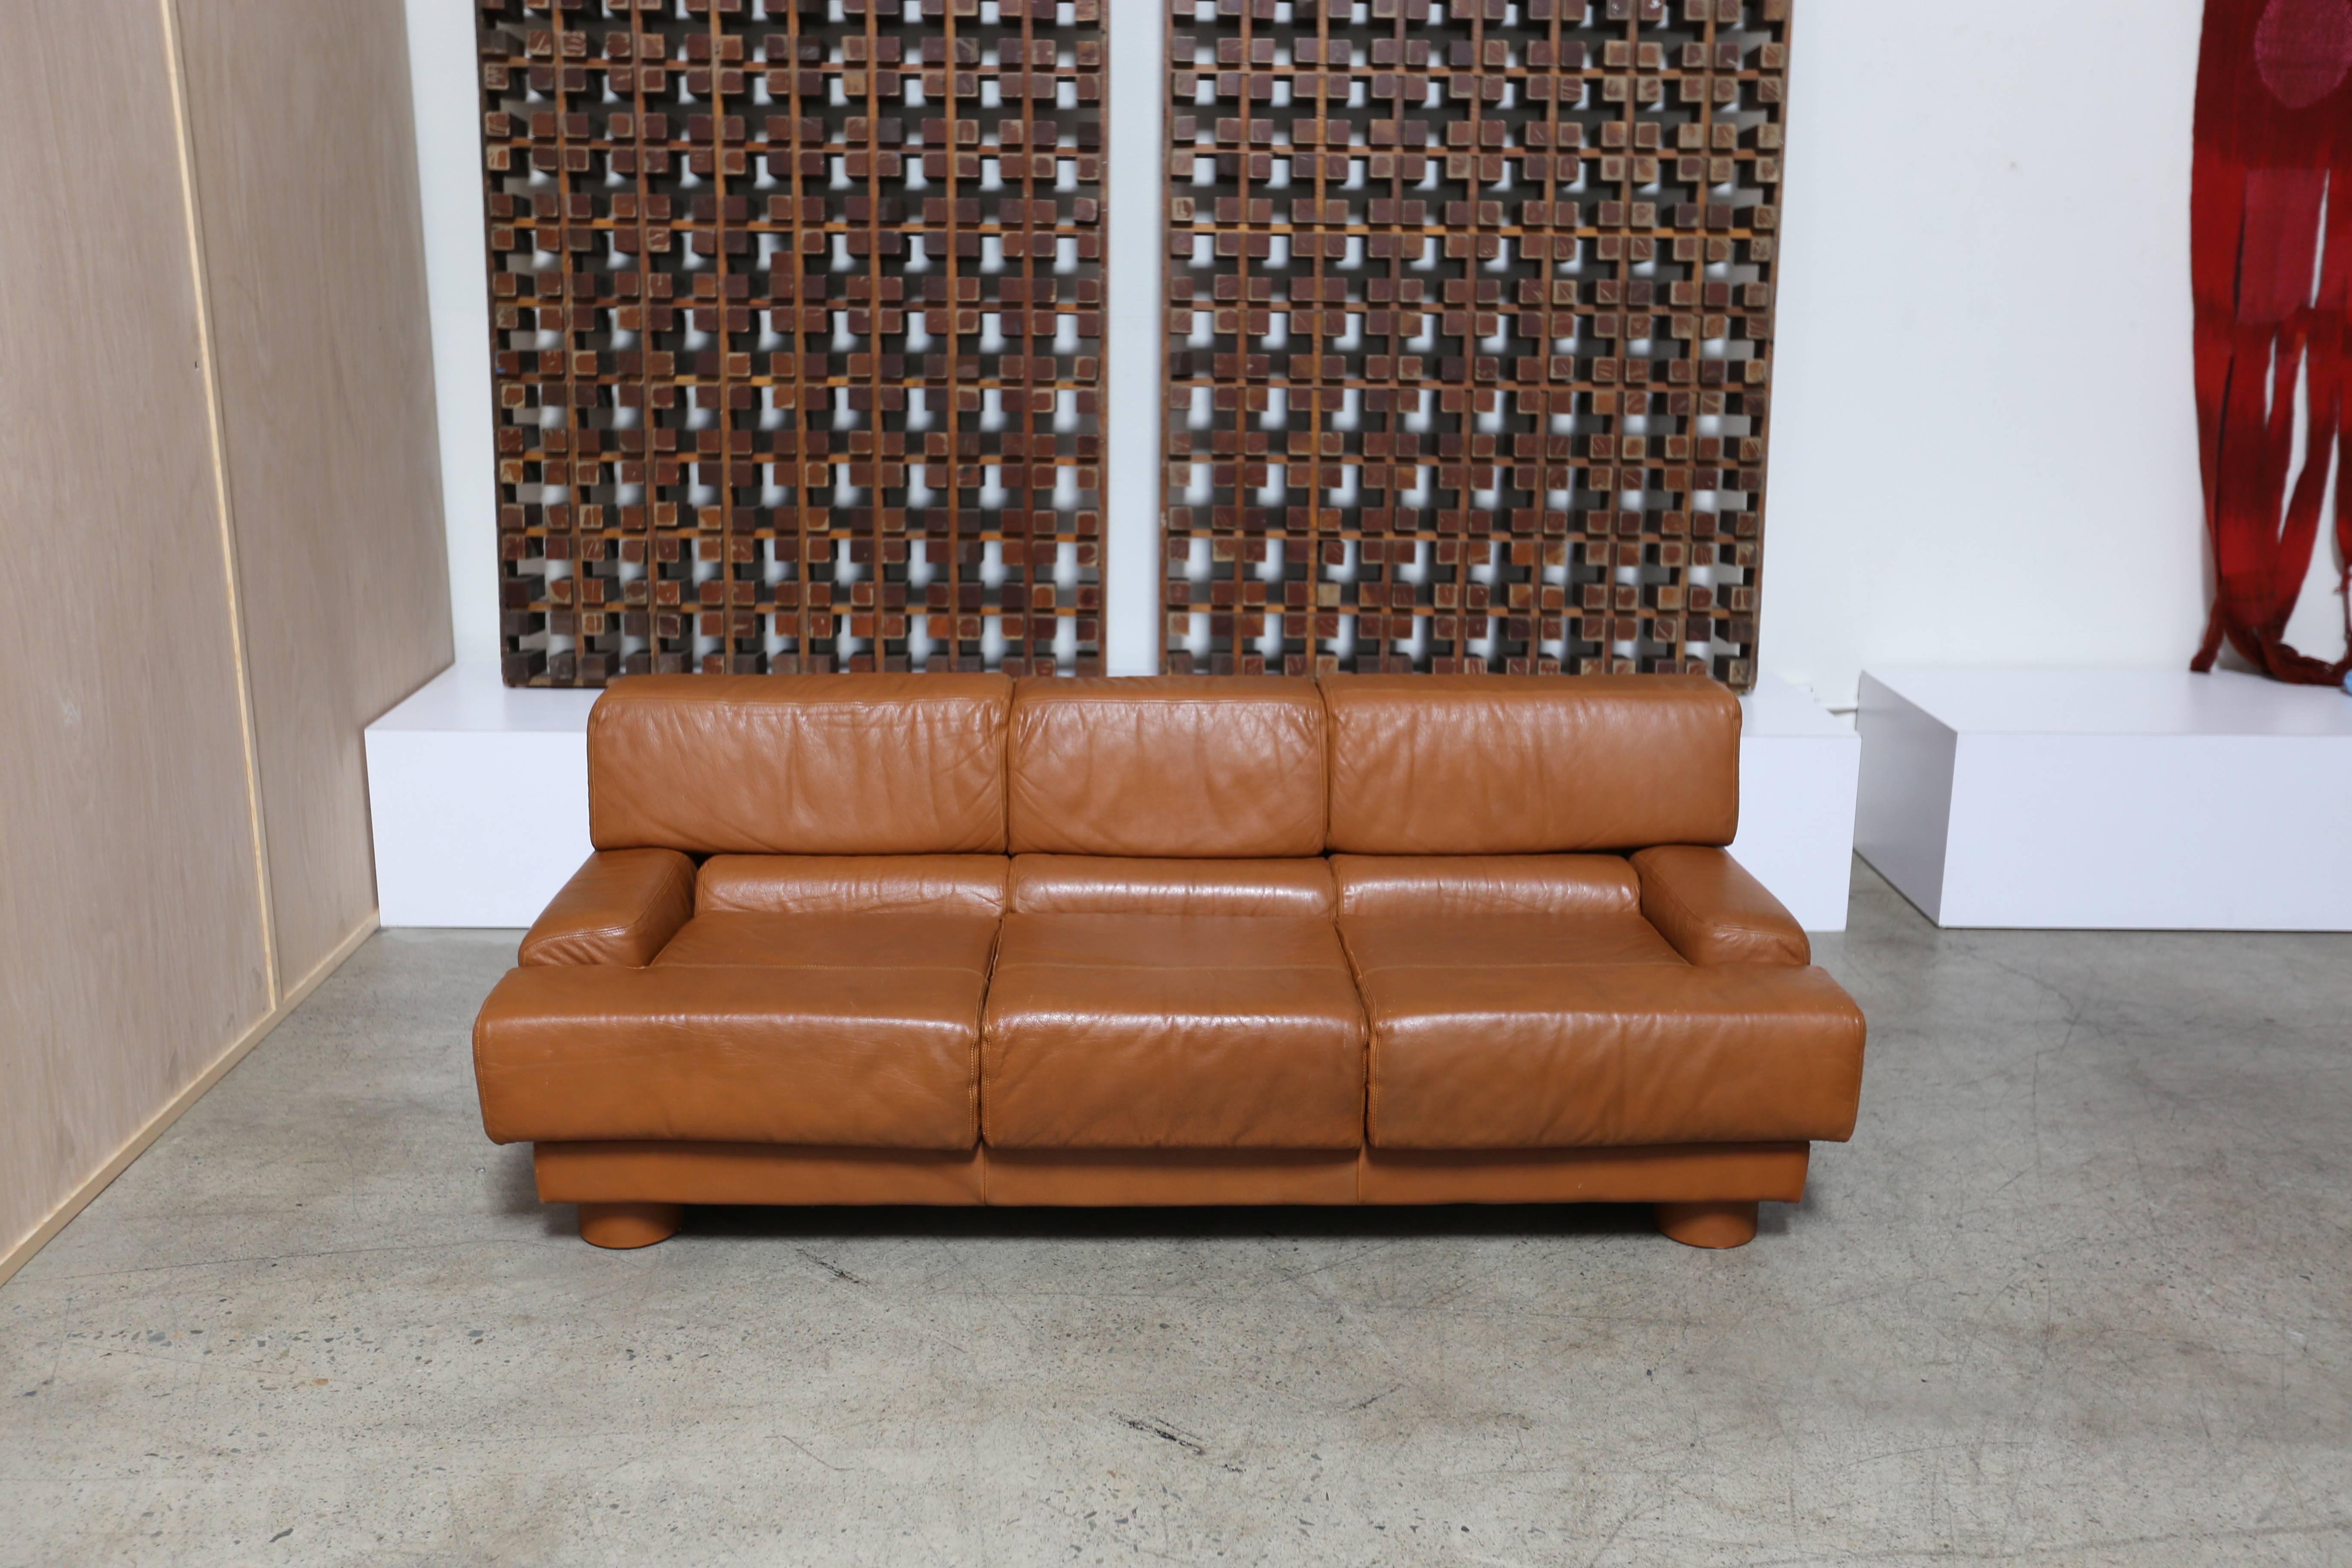 Leather sofa by Percival Lafer, Brazil.